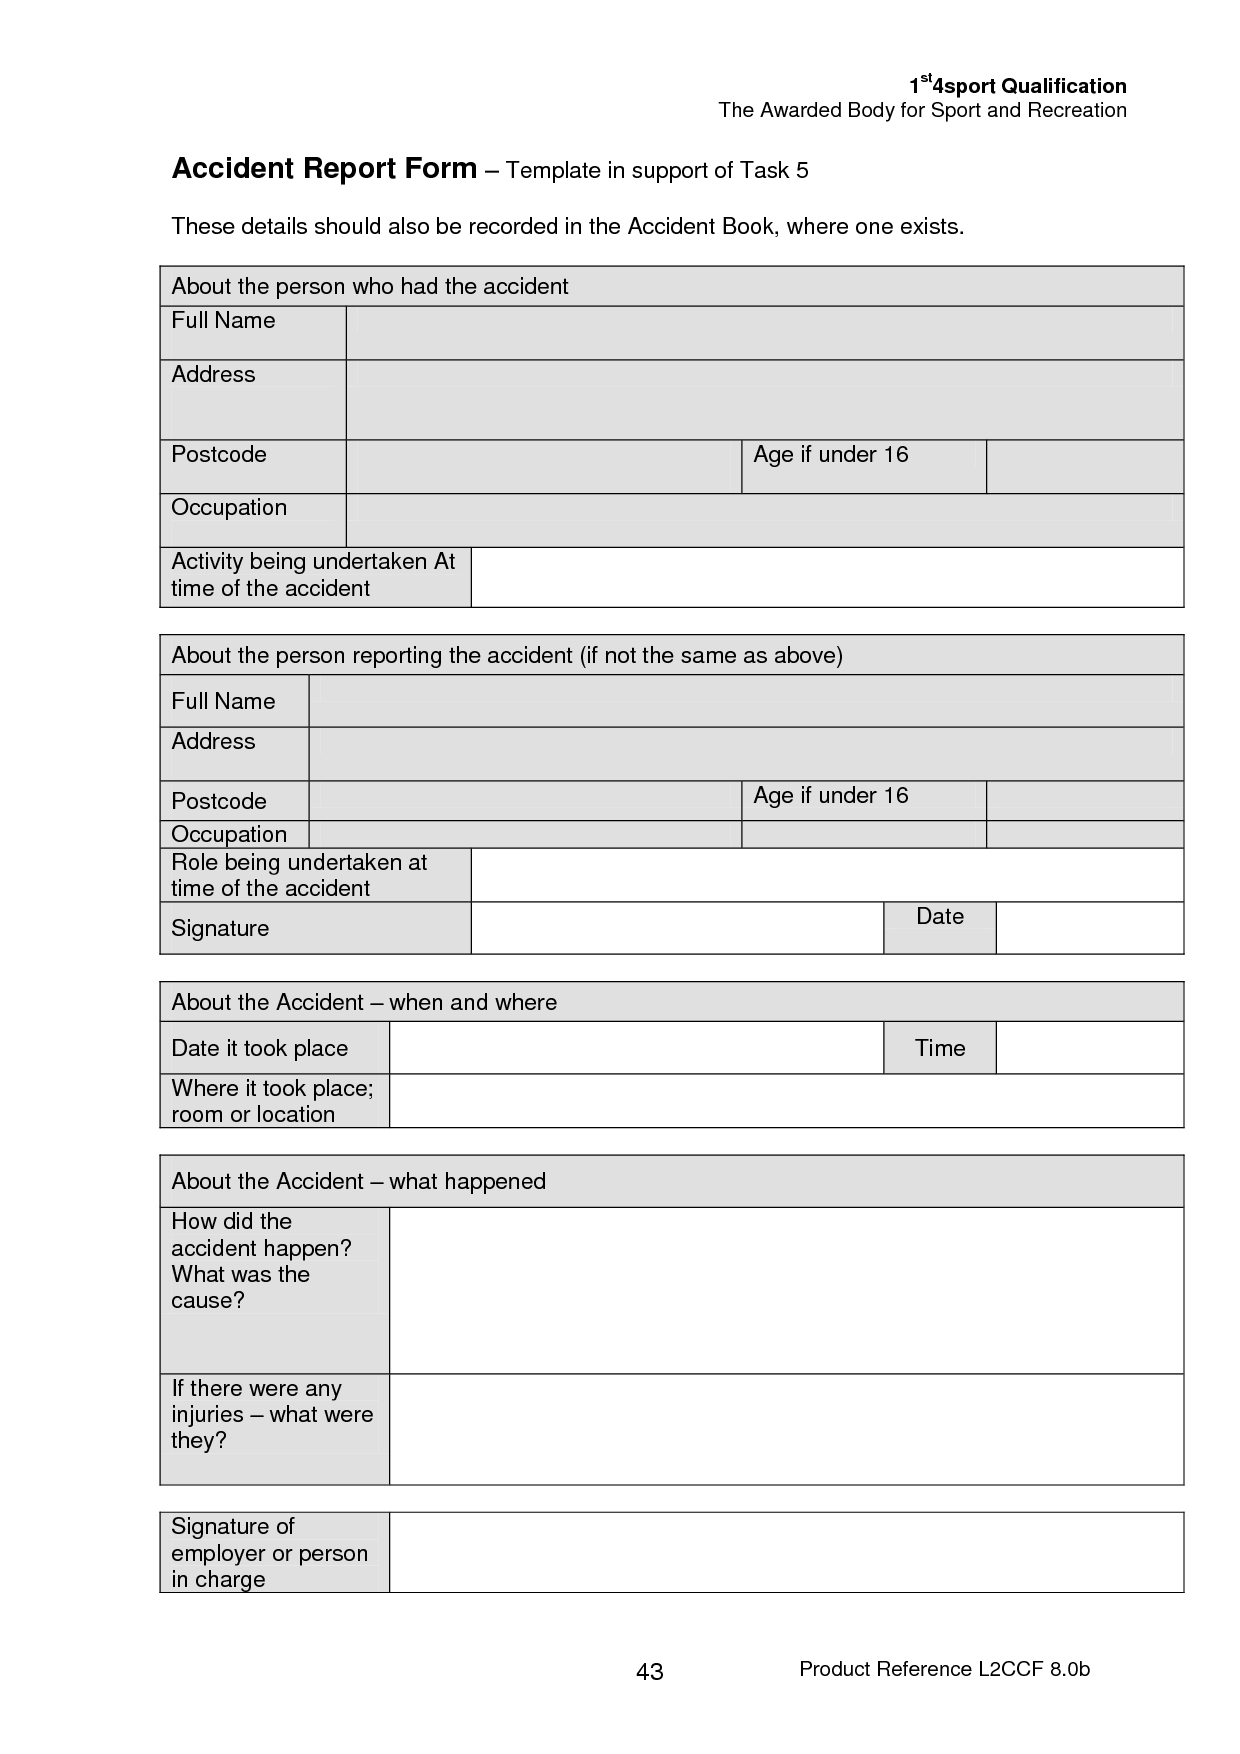 006 Car Accident Report Form Template 290045 Fascinating Intended For Vehicle Accident Report Template